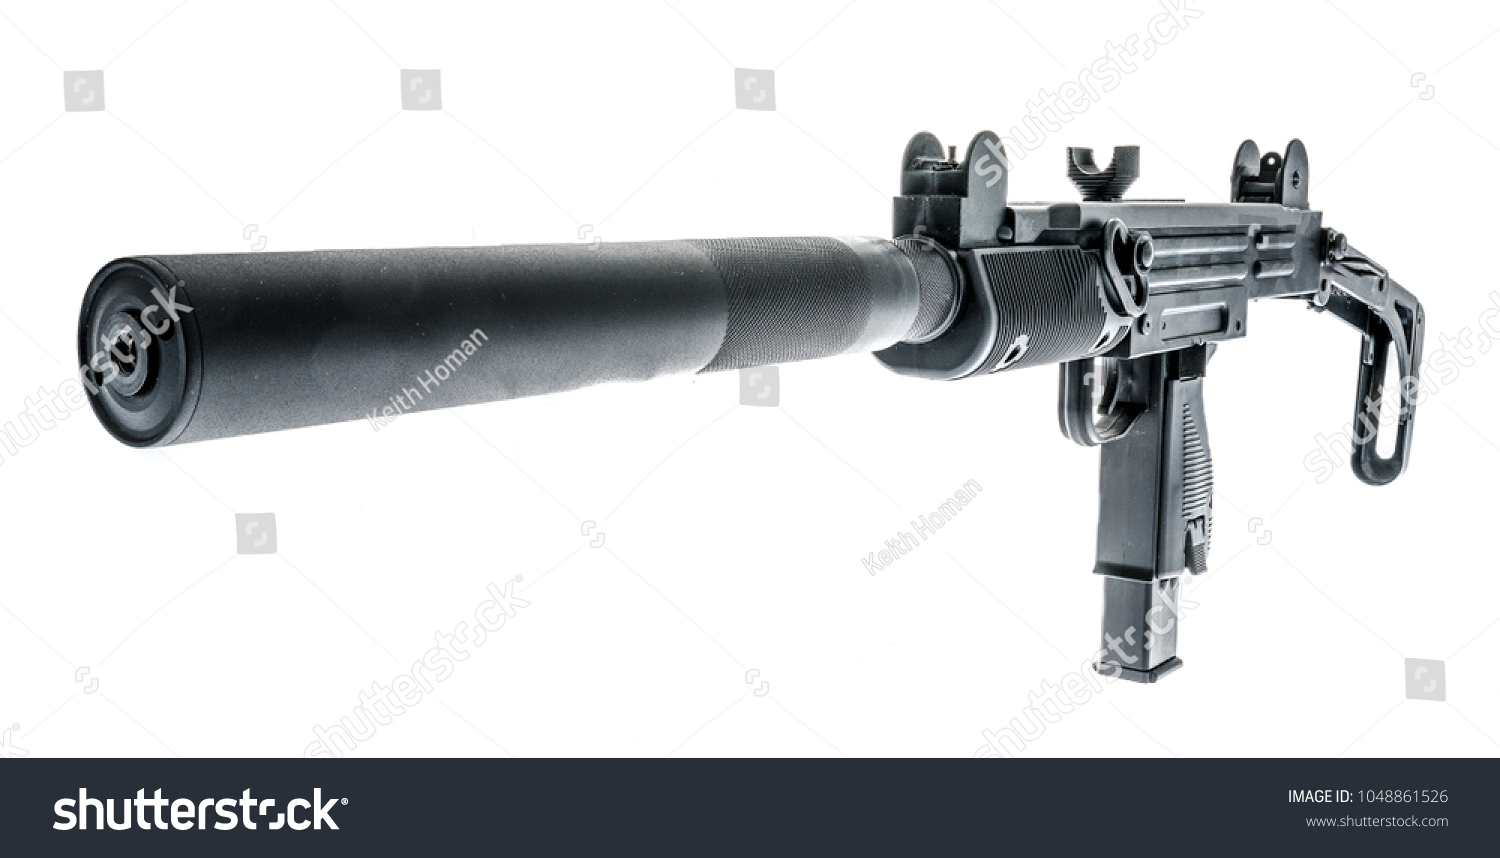 An UZI with a silencer and it's stock extended on an isolated background. #1048861526